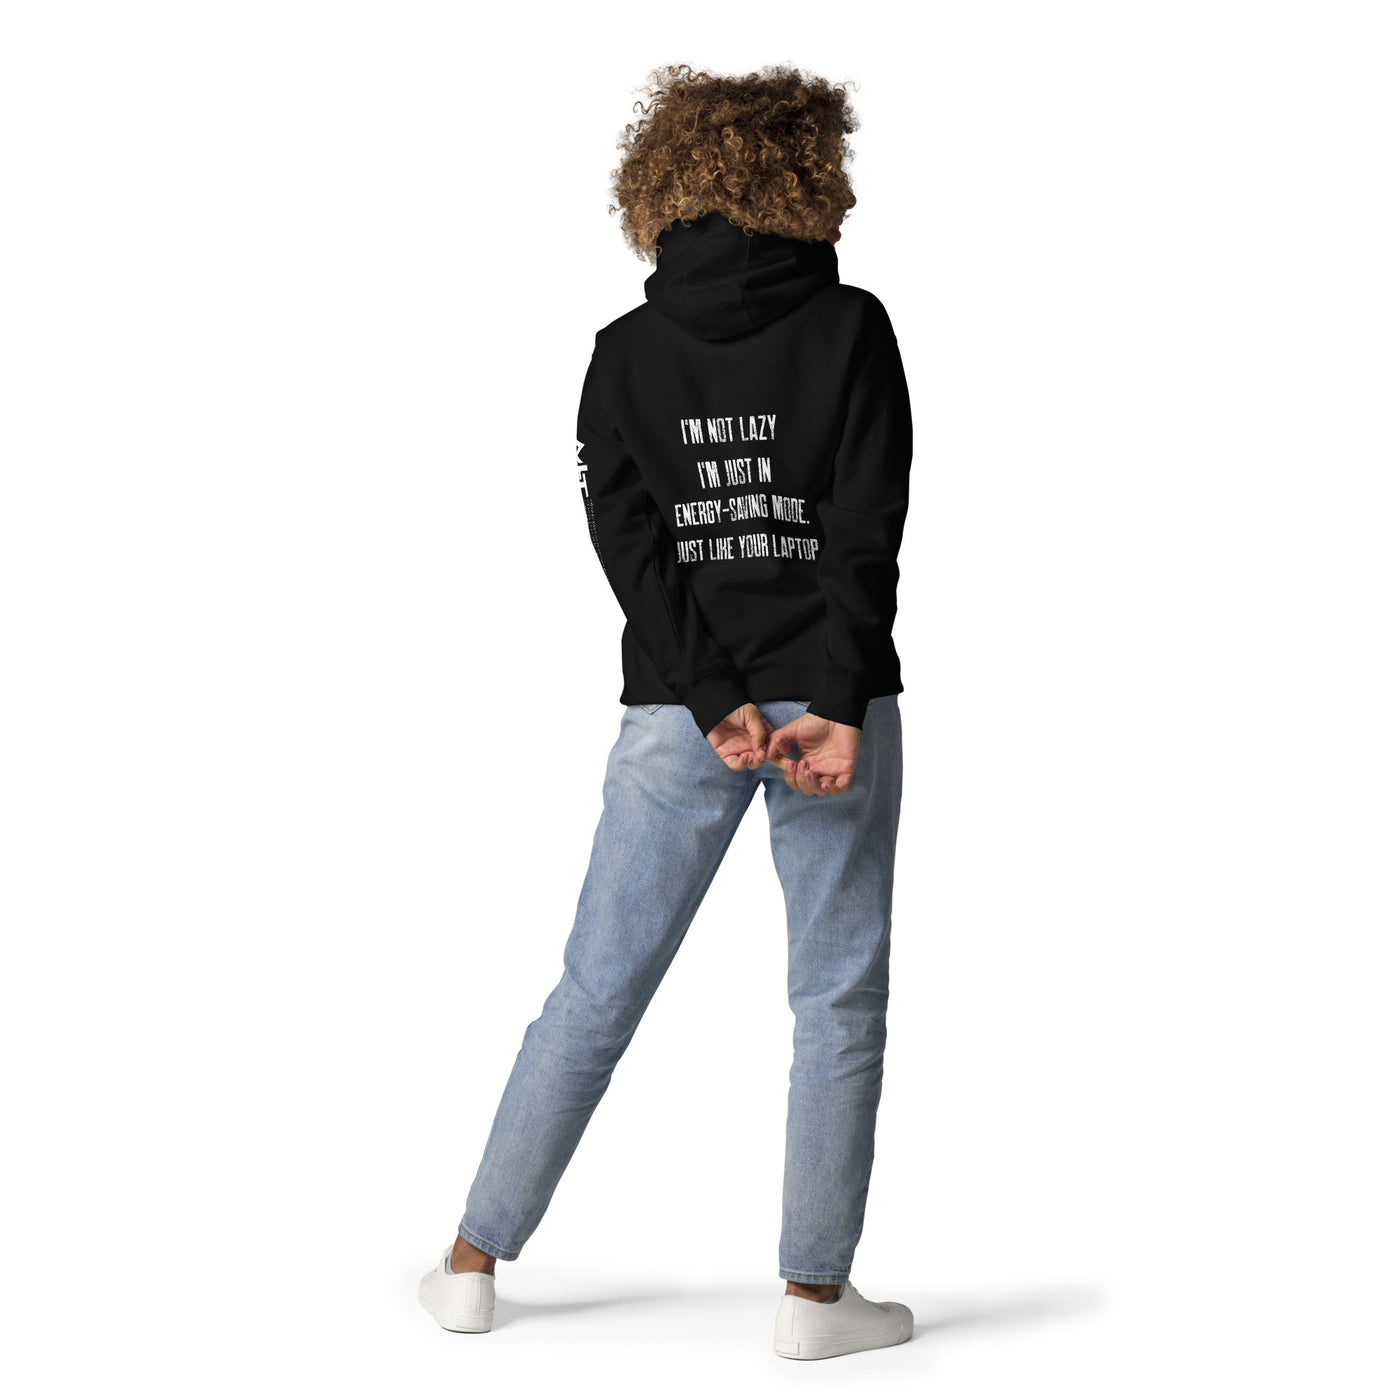 I am not lazy, I am in Energy-Saving Mode, Just like your laptop V1 - Unisex Hoodie ( Back Print )